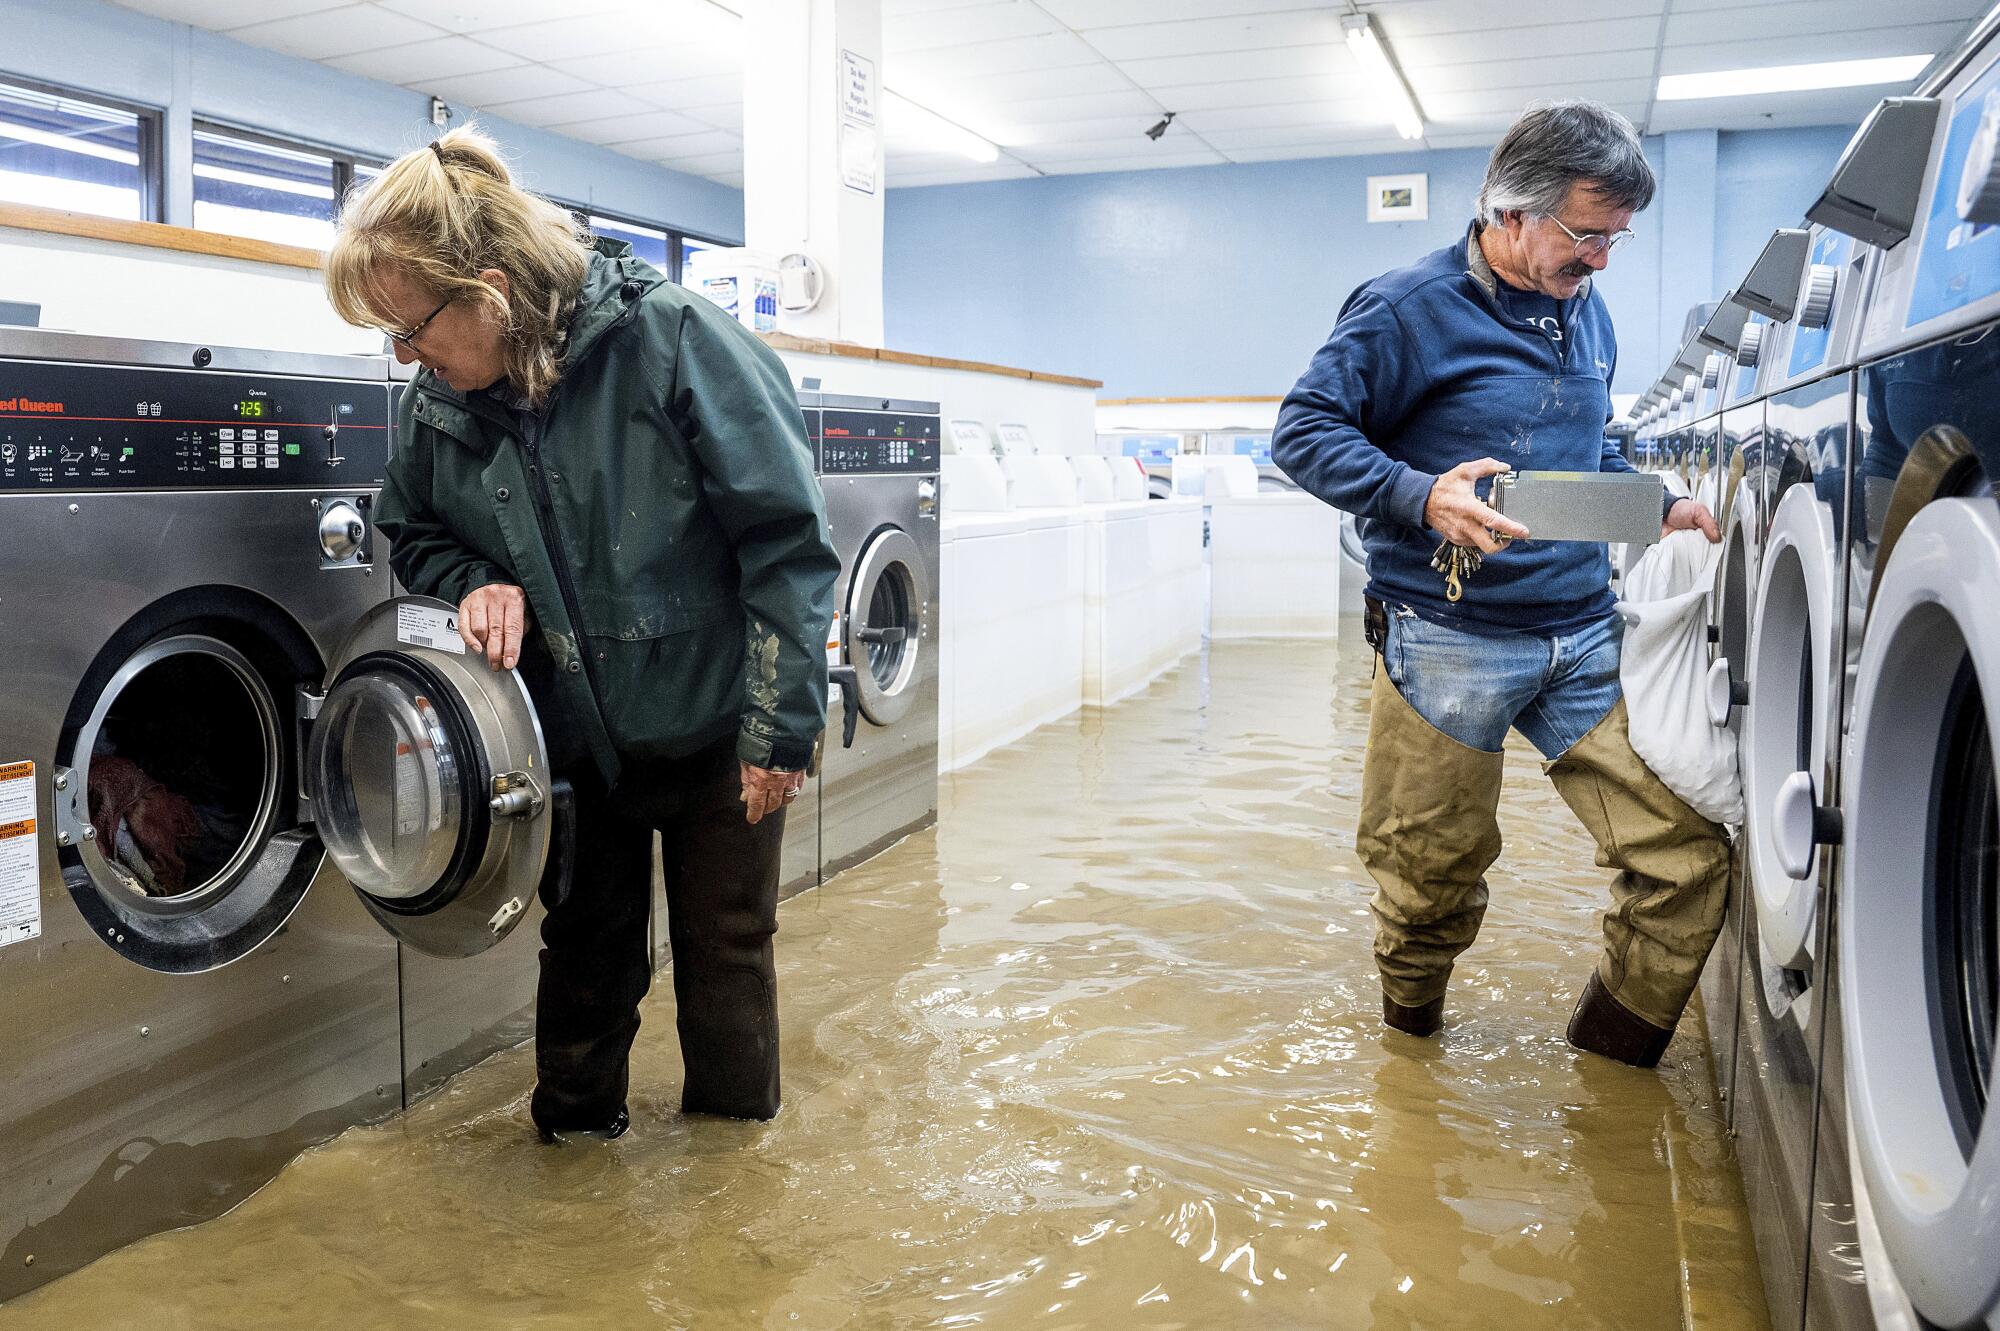 A man and woman empty coins from machines in a flooded  laundromat